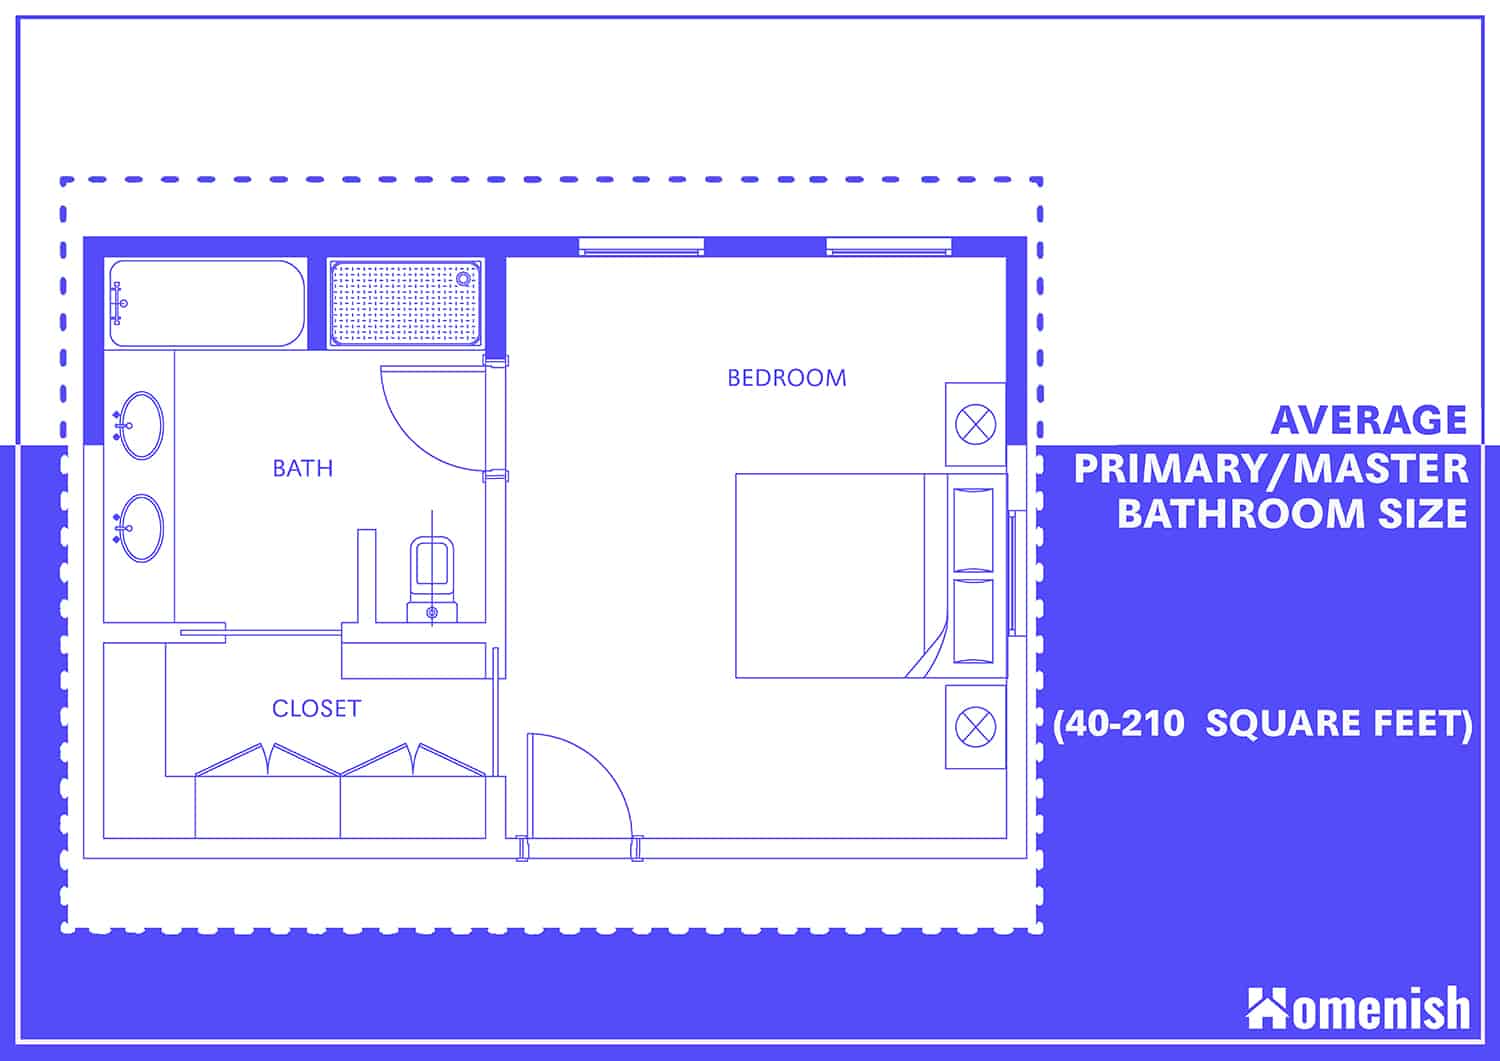 What Is The Average Size Of Bathroom Homenish - How Many Square Feet Is A Typical Bathroom